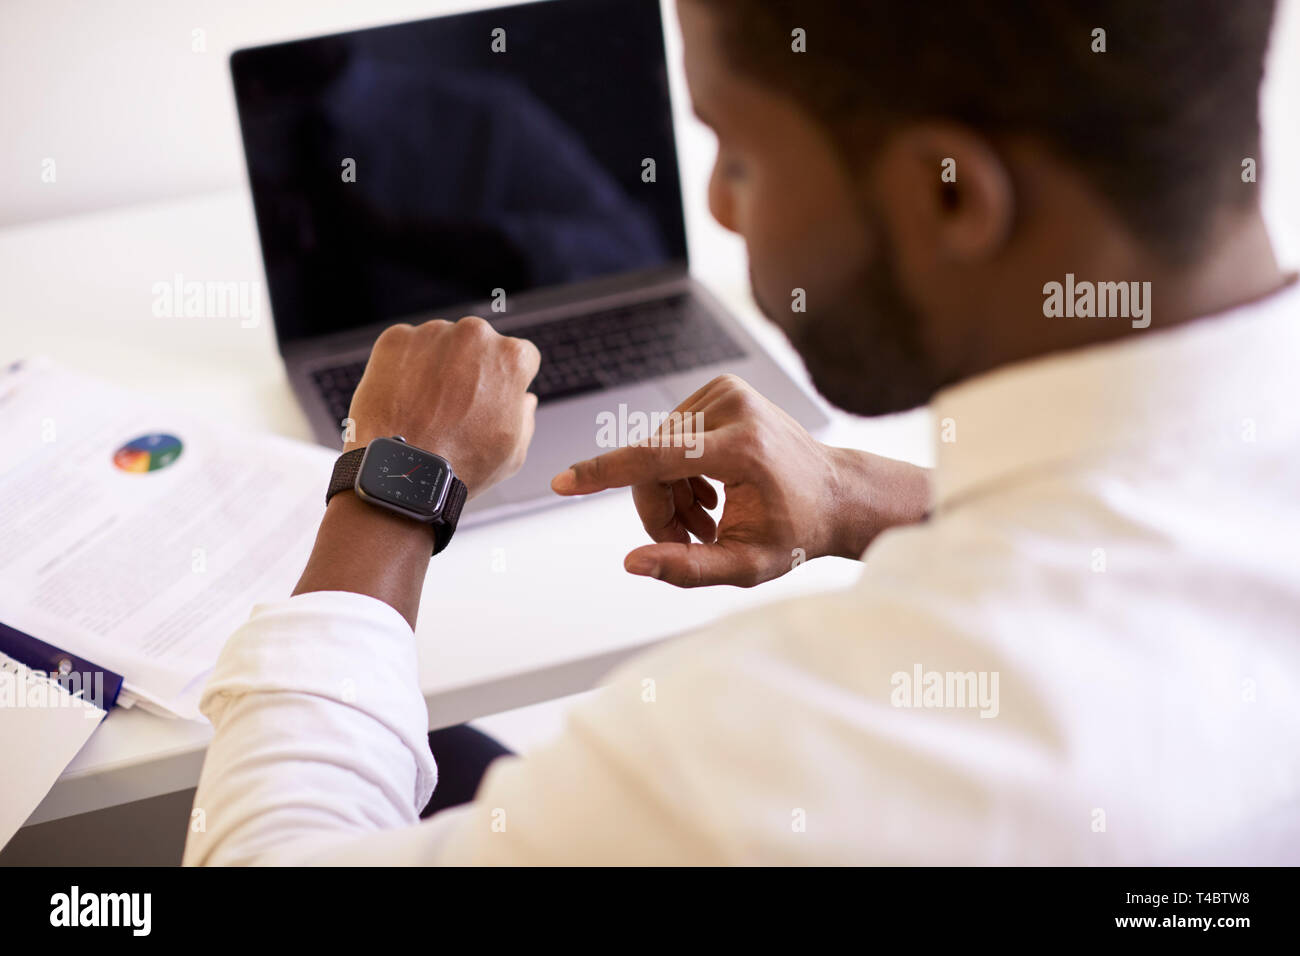 Businessman Working On Laptop At Desk In Modern Office Checking Data On Smart Watch Stock Photo